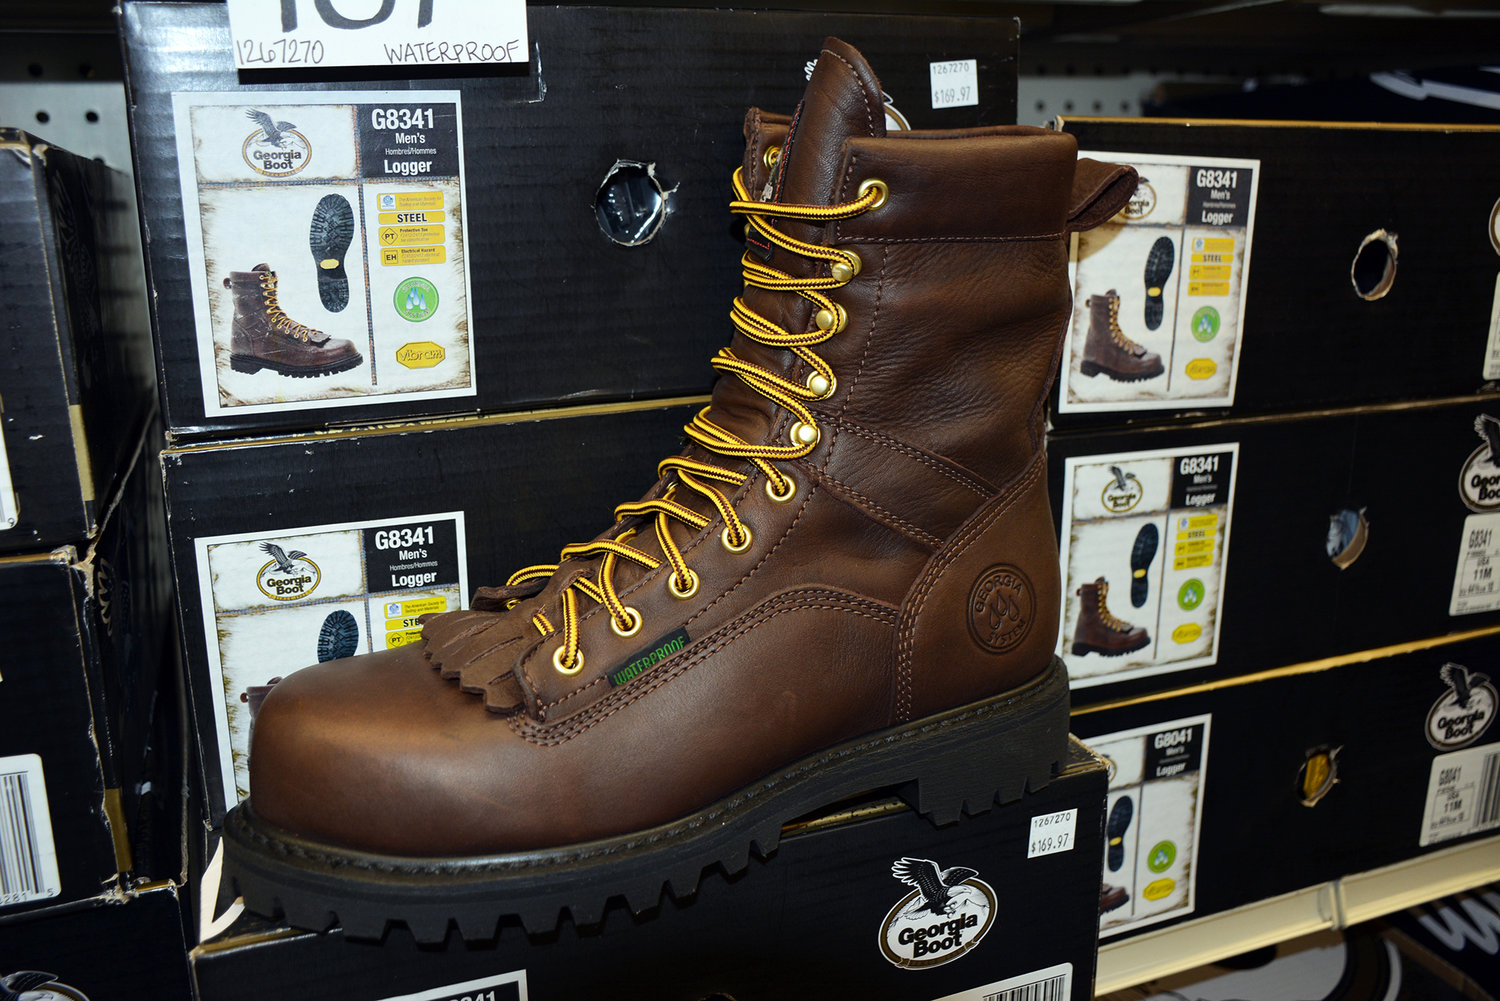 One of many Georgia Boot products is seen on display at the Sunbird Shopping Center in Yelm.